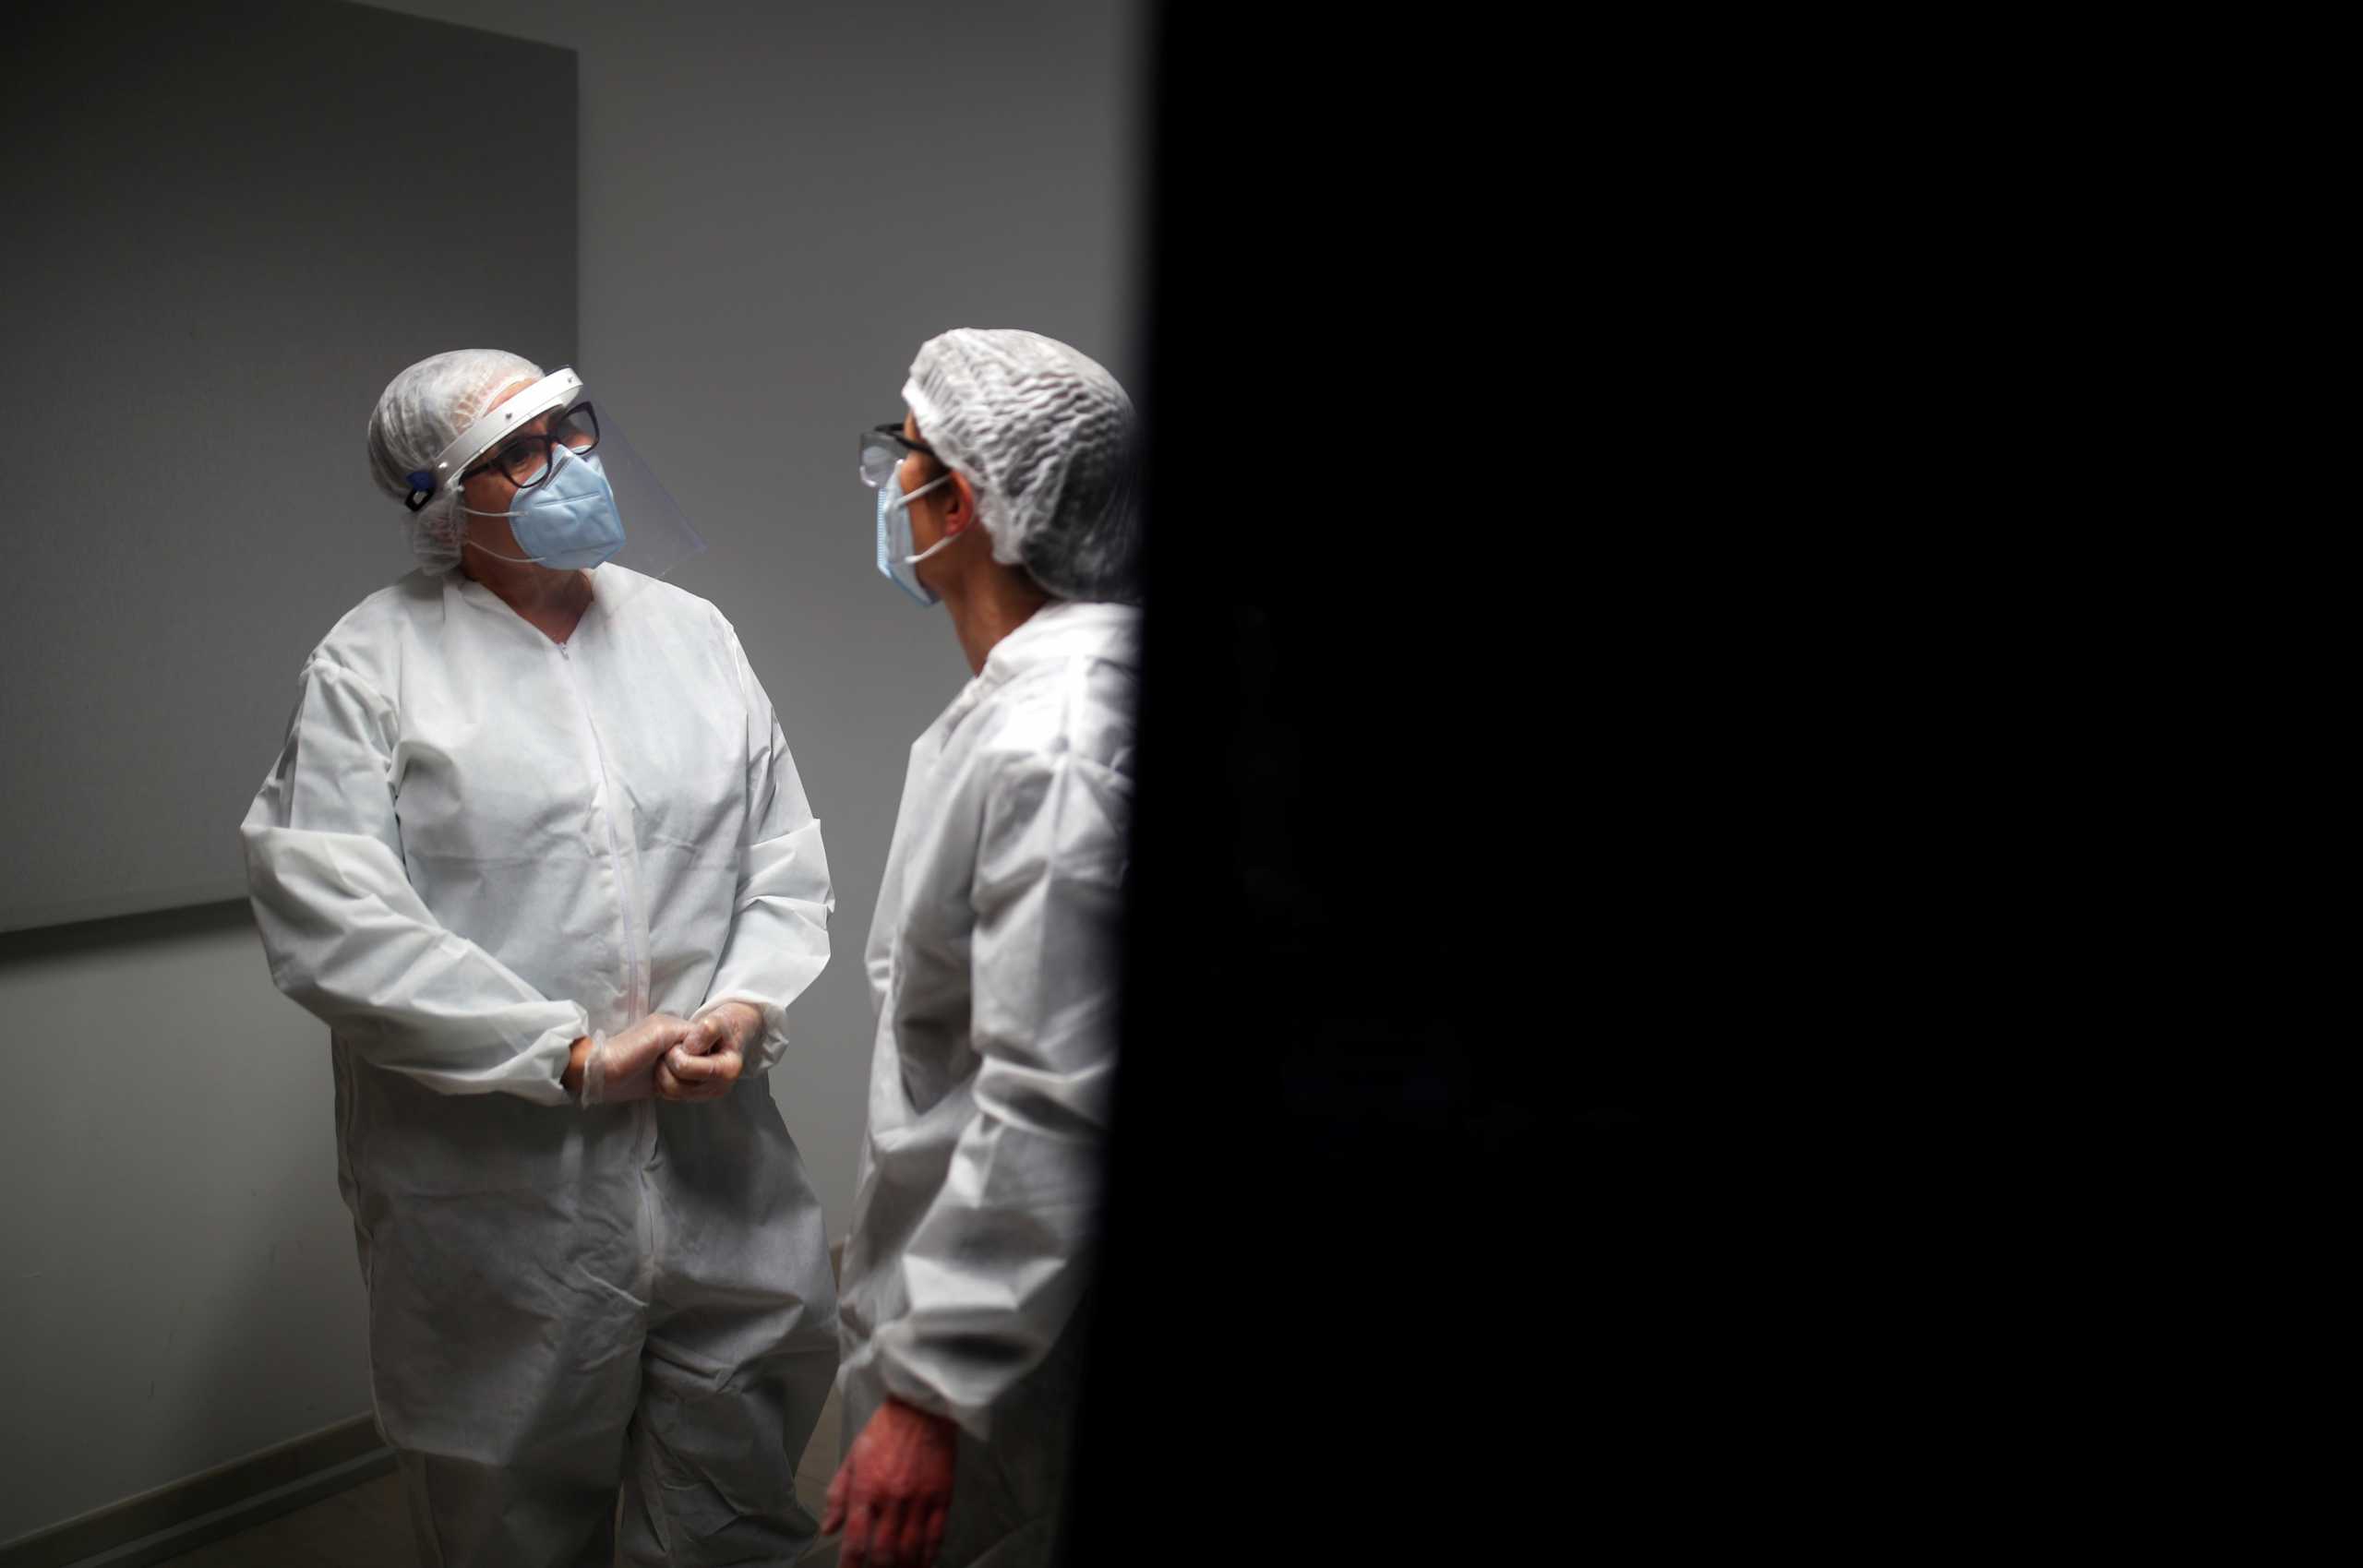 Medical workers, wearing protective suits and face masks, talk as they work at a coronavirus disease (COVID-19) testing centre in Le Bignon, France, December 22, 2020. REUTERS/Stephane Mahe/File Photo